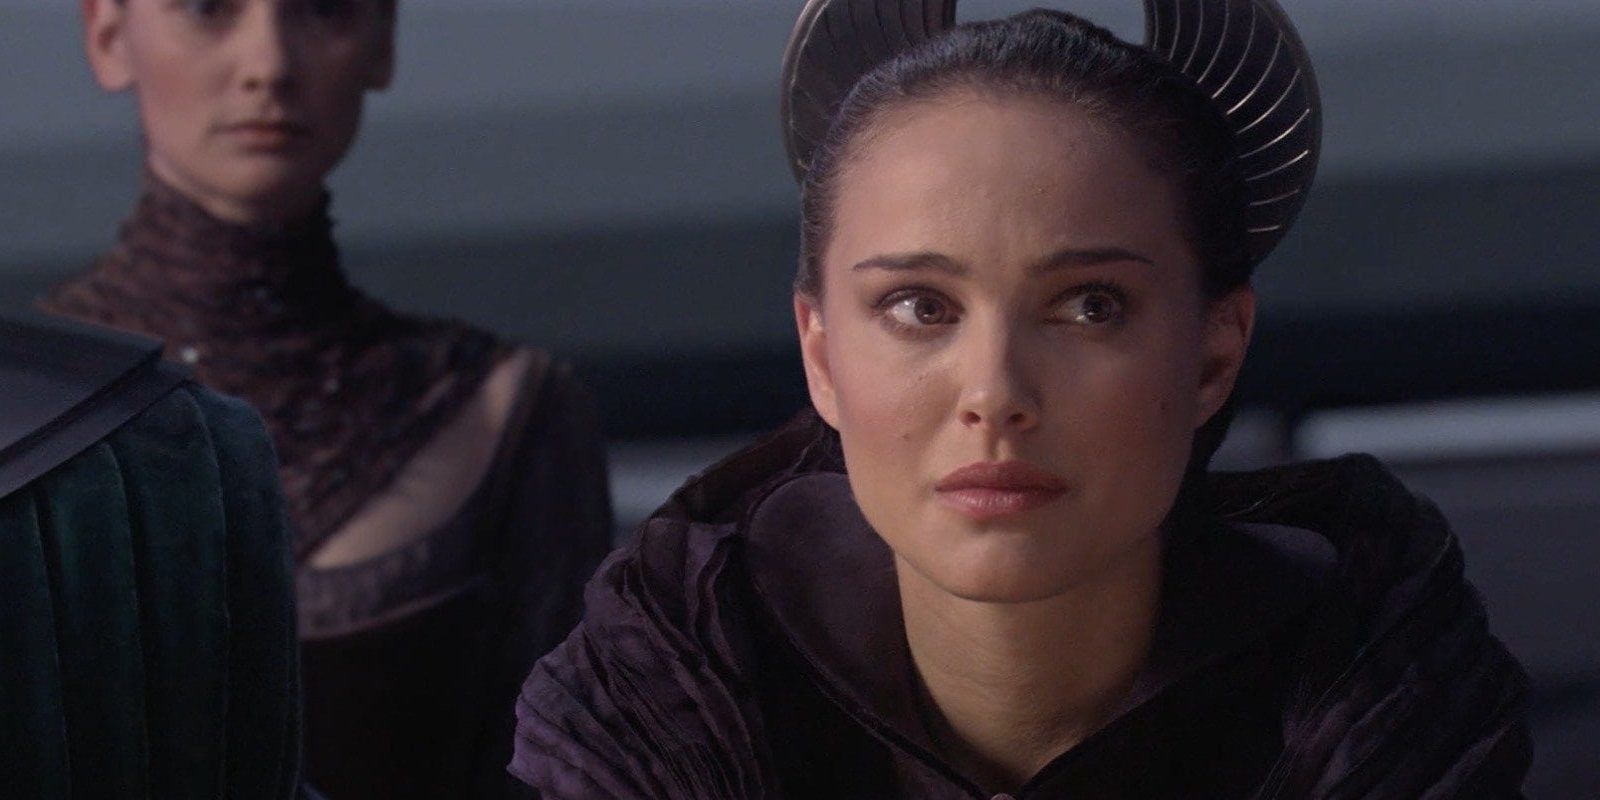 Padmé comments on the death of liberty in Revenge of the Sith